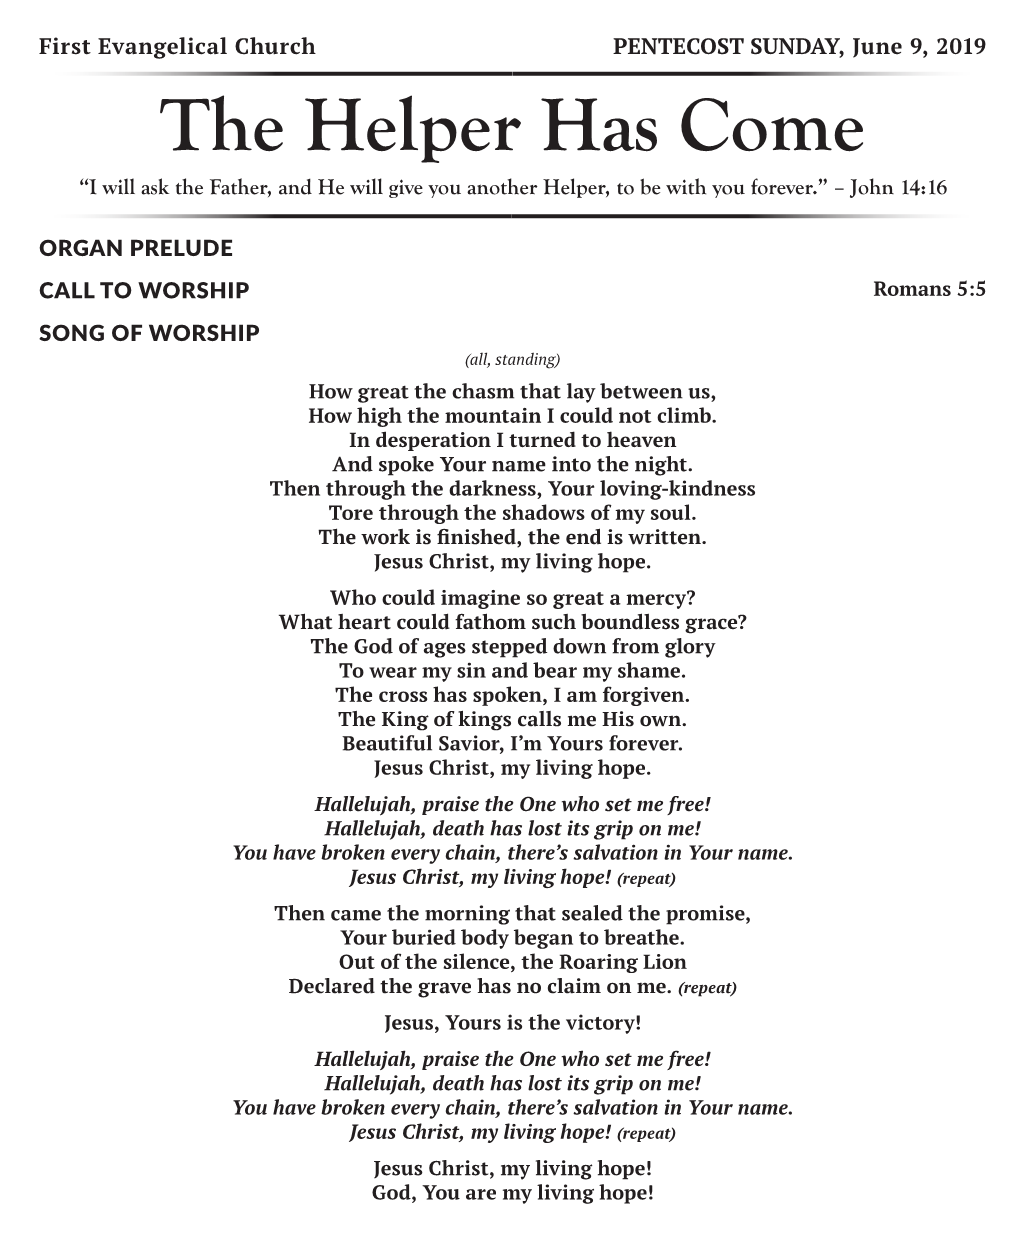 The Helper Has Come “I Will Ask the Father, and He Will Give You Another Helper, to Be with You Forever.” – John 14:16